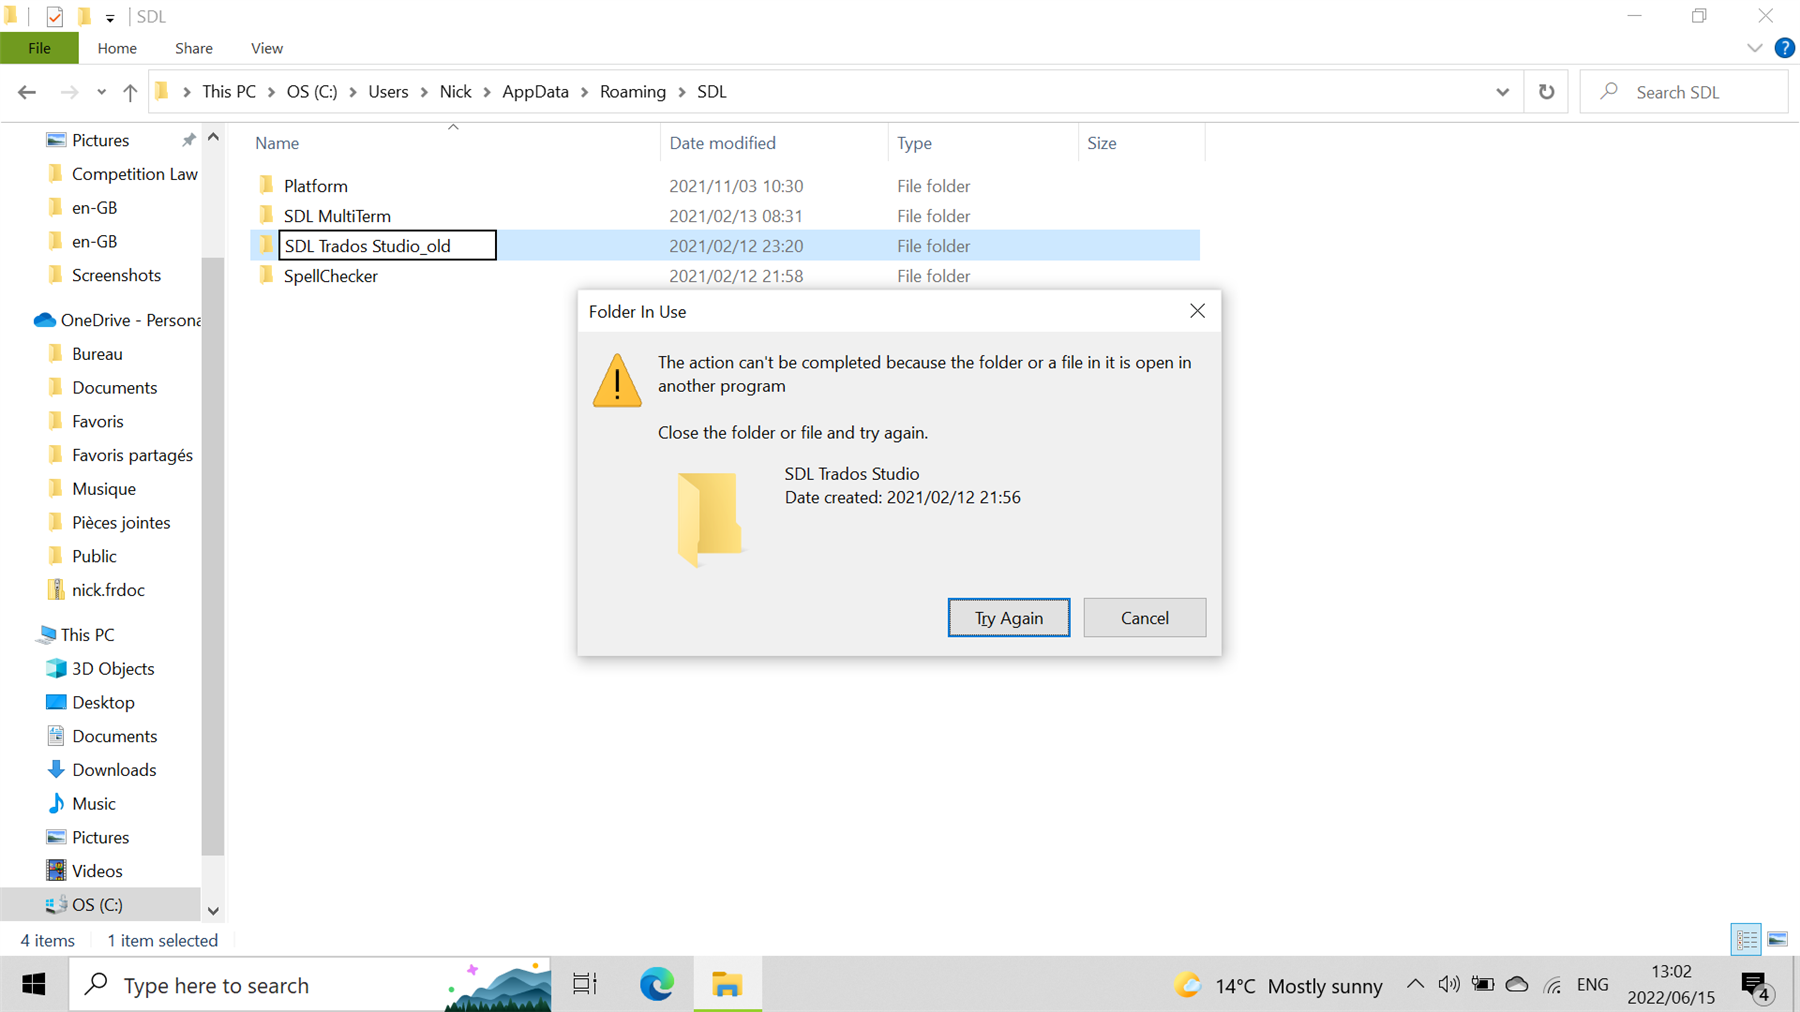 Error message window overlaying a file explorer showing SDL folders. Message reads 'The action can't be completed because the folder or a file in it is open in another program'.